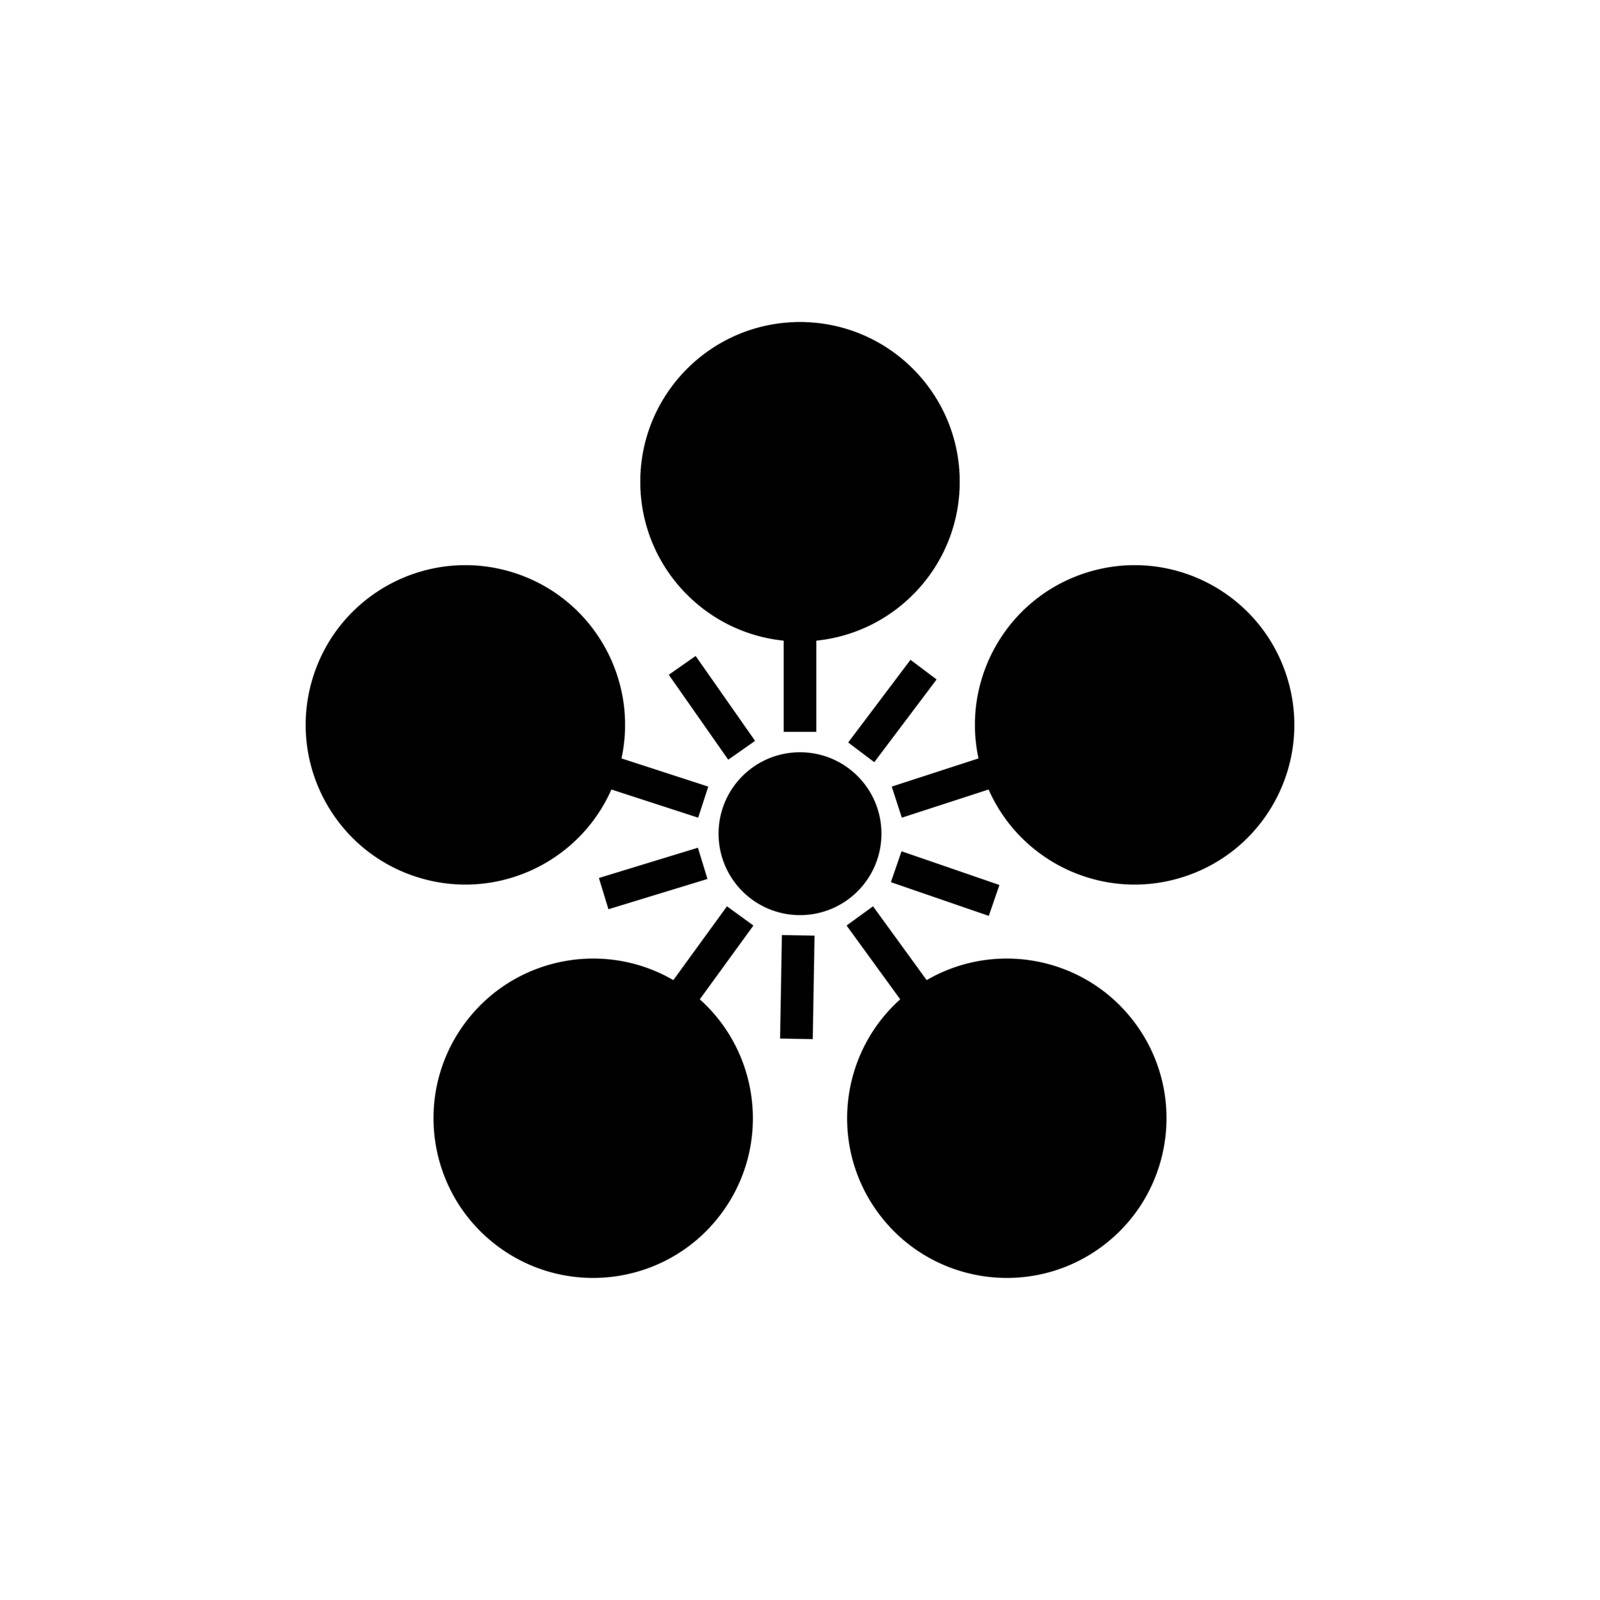 Sign or symbol in Japanese style design on white by infinityyy